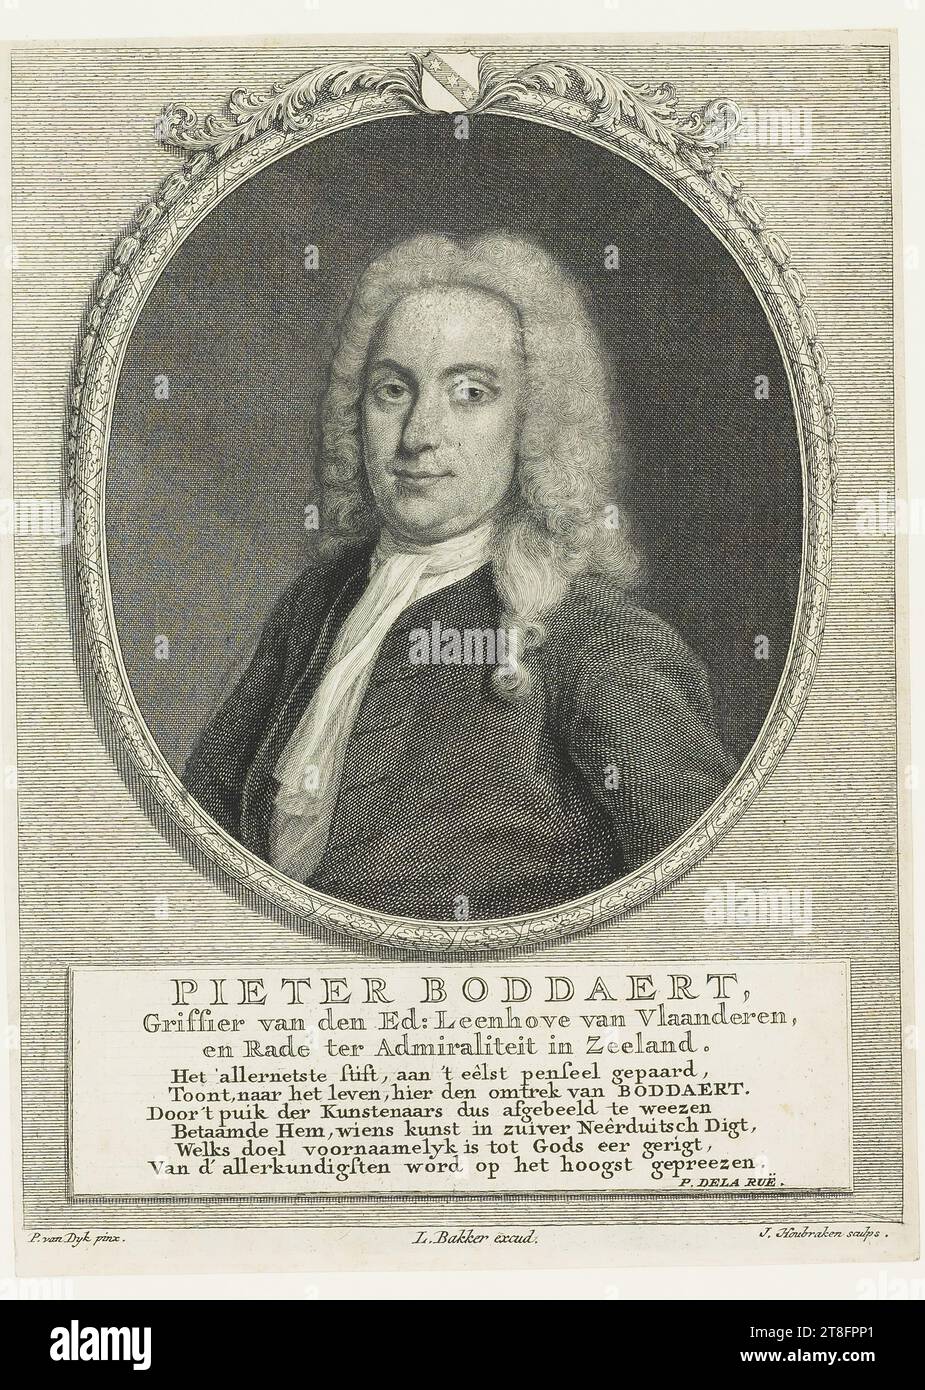 PIETER BODDAERT, Clerk of Ed: Leenhove van Vlaanderen, en Rade ter Admiraliteit in Zeeland, The very best marker, attached to the brush, Shows, to life, here the outline of BODDAERT., To be thus depicted by the very best of artists, Befitting him, whose art in pure Neo-German digt, Whose aim is foremost to God's glory, Of the most learned is praised at the highest, P. DELA RUË. P. van Dyk pinx. L. Bakker excud. J. Houbraken sculps Stock Photo